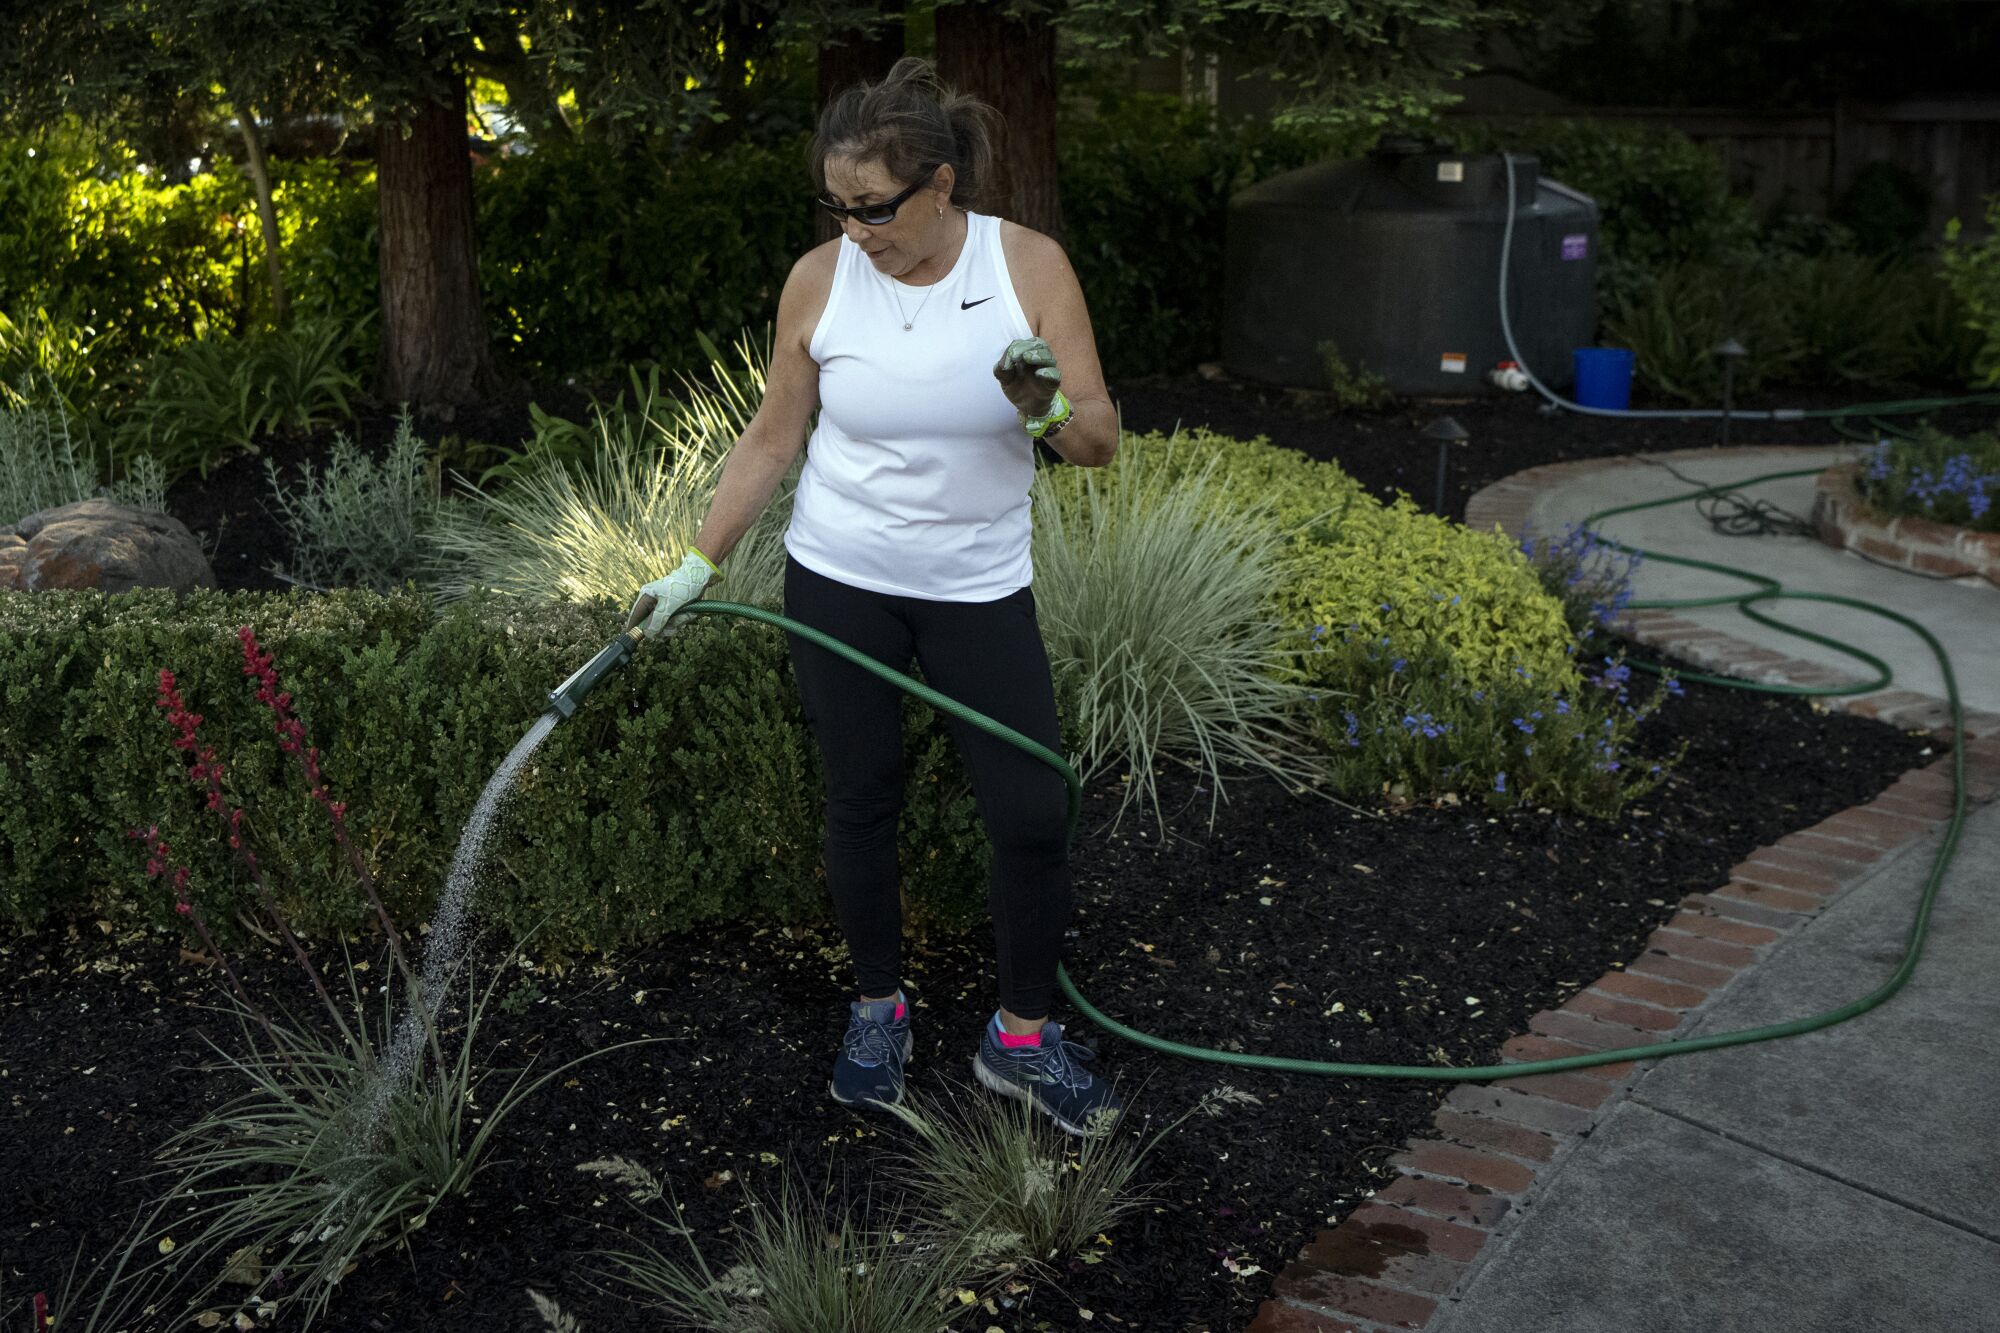 A woman uses a hose to water plants.